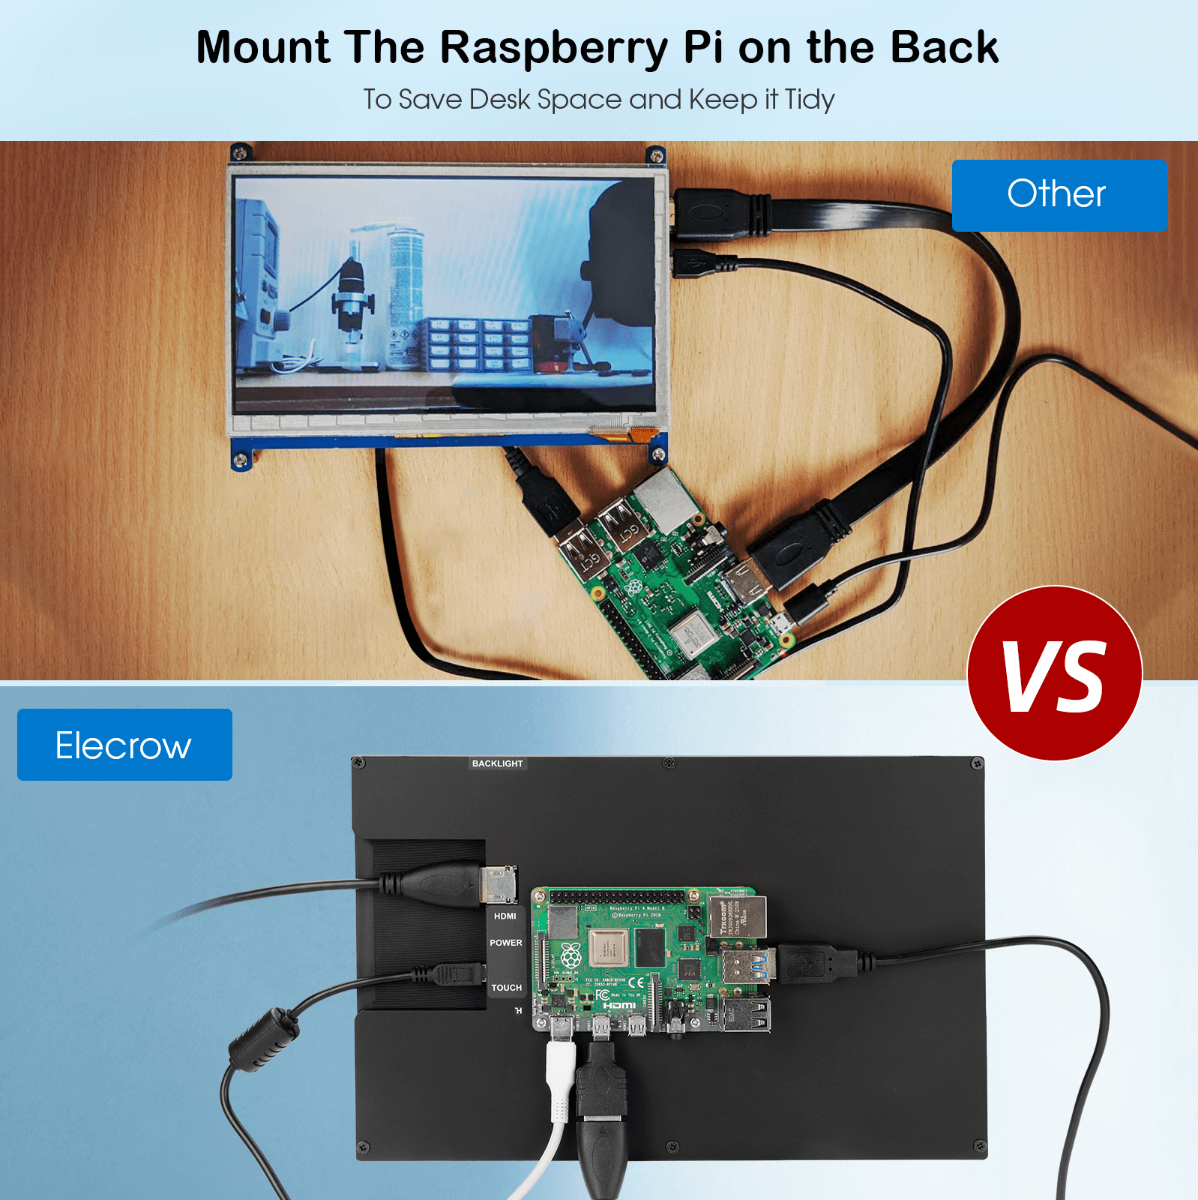 Mount The Raspberry Pi on the back